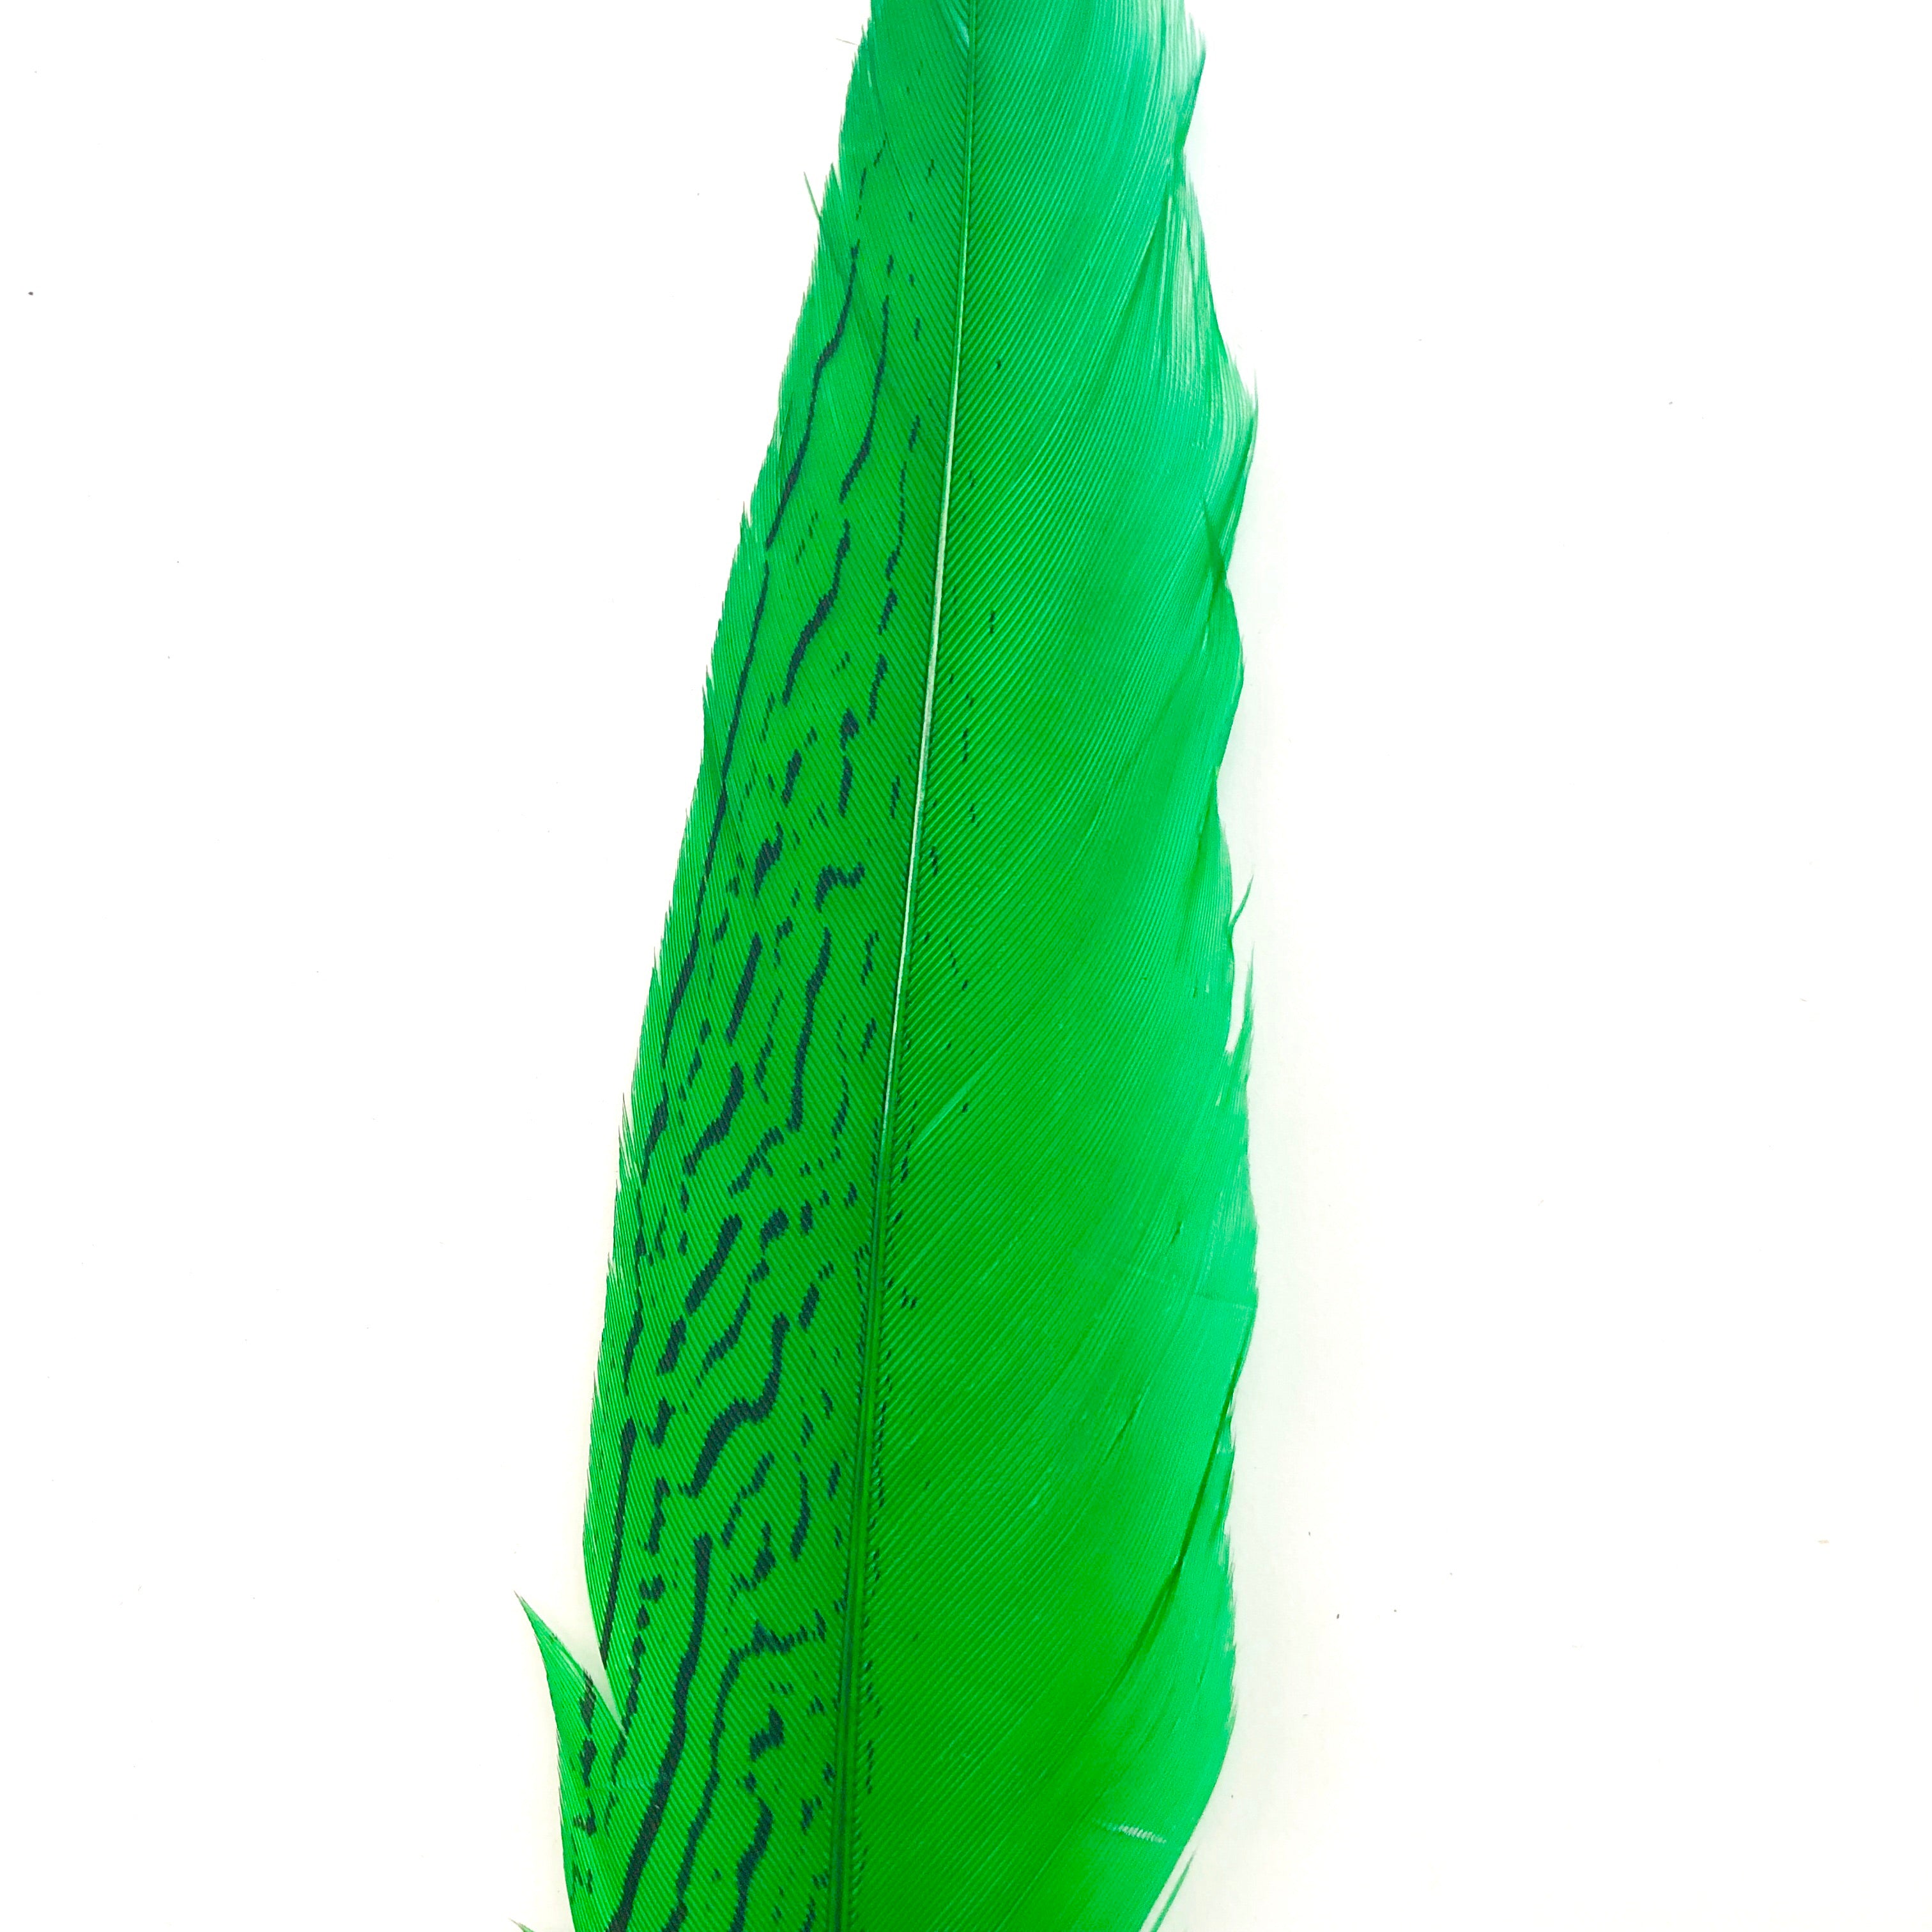 6" to 10" Silver Pheasant Tail Feather - Green ((SECONDS))